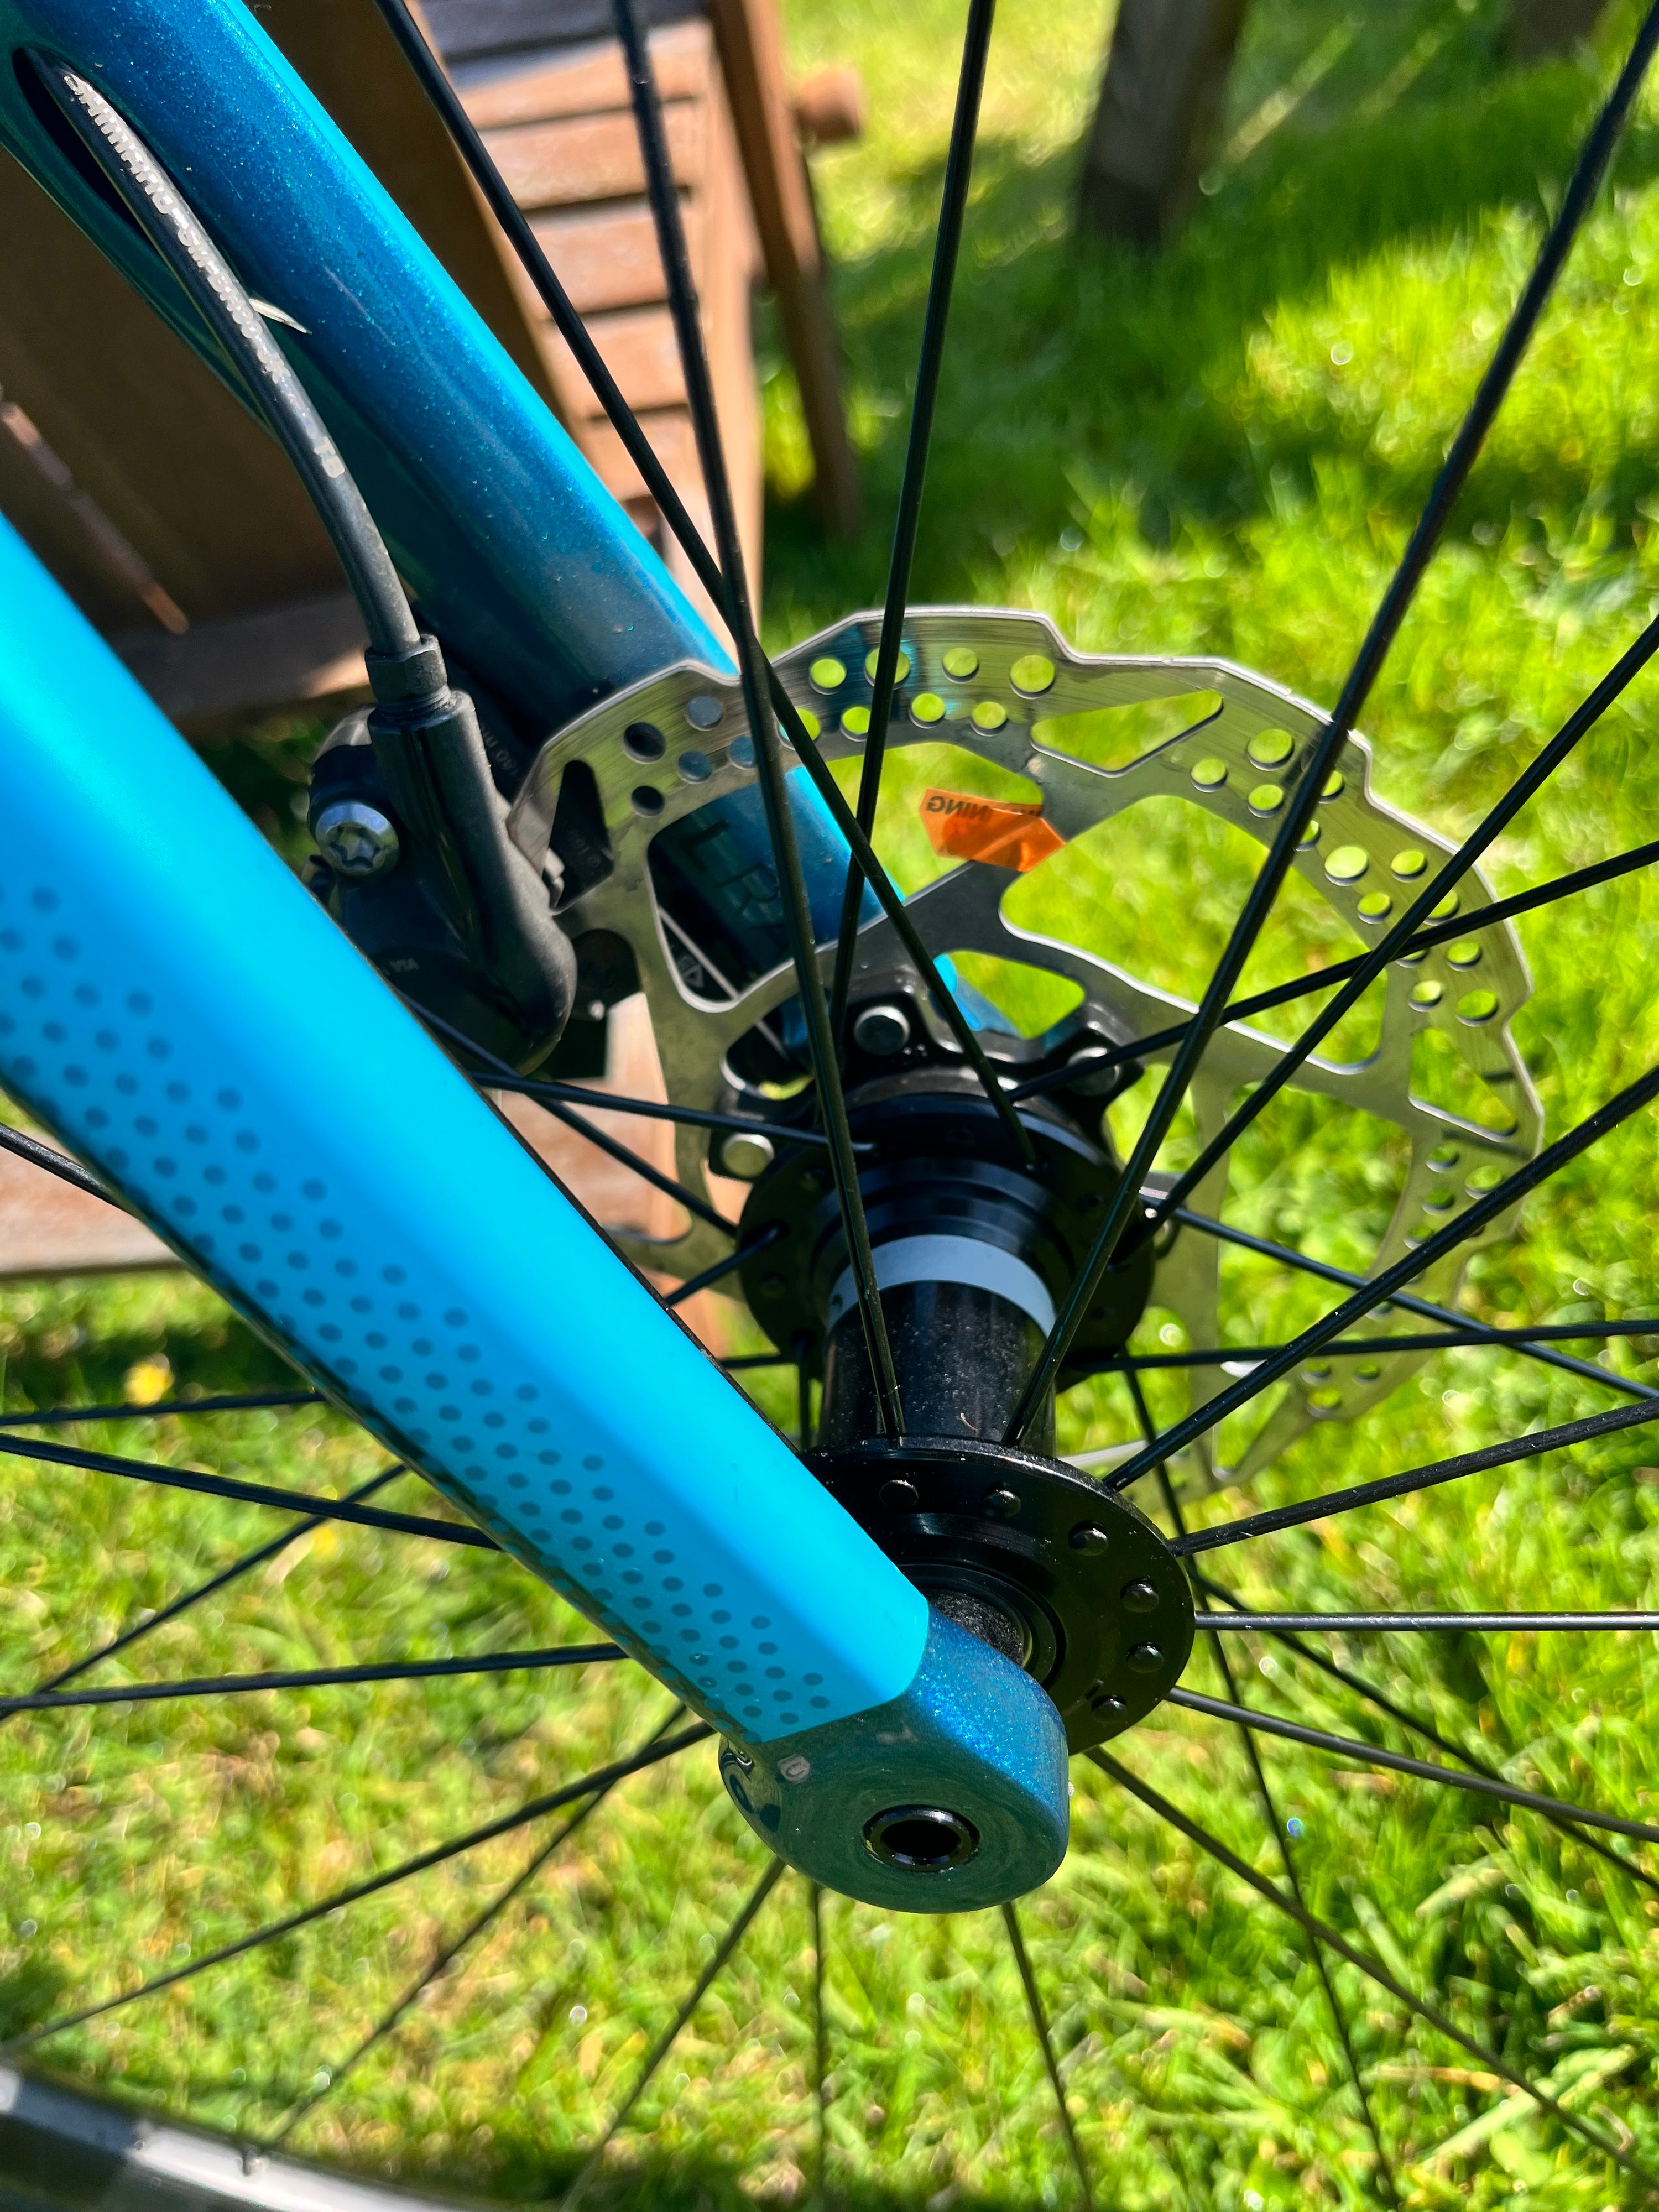 <span style="background-color:rgb(246,247,248);color:rgb(28,30,33);"> CUBE Axial WS GTC SL 2021 Road bike </span>